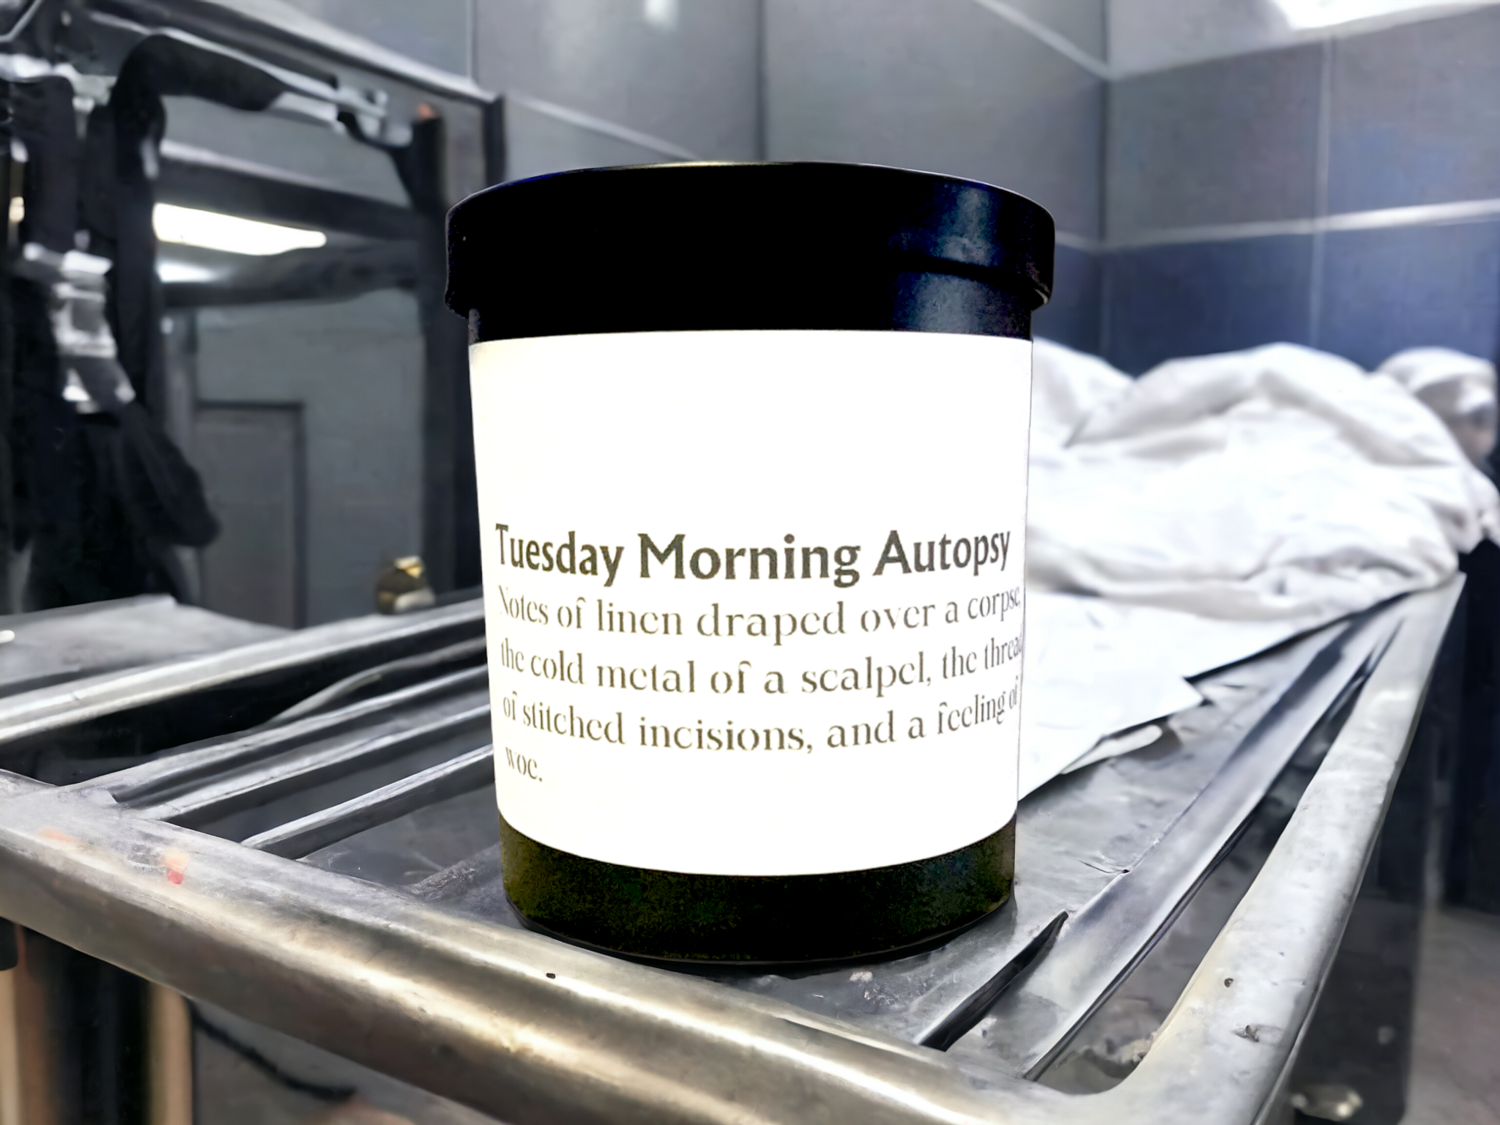 Tuesday Morning Autopsy (10 oz Candle)